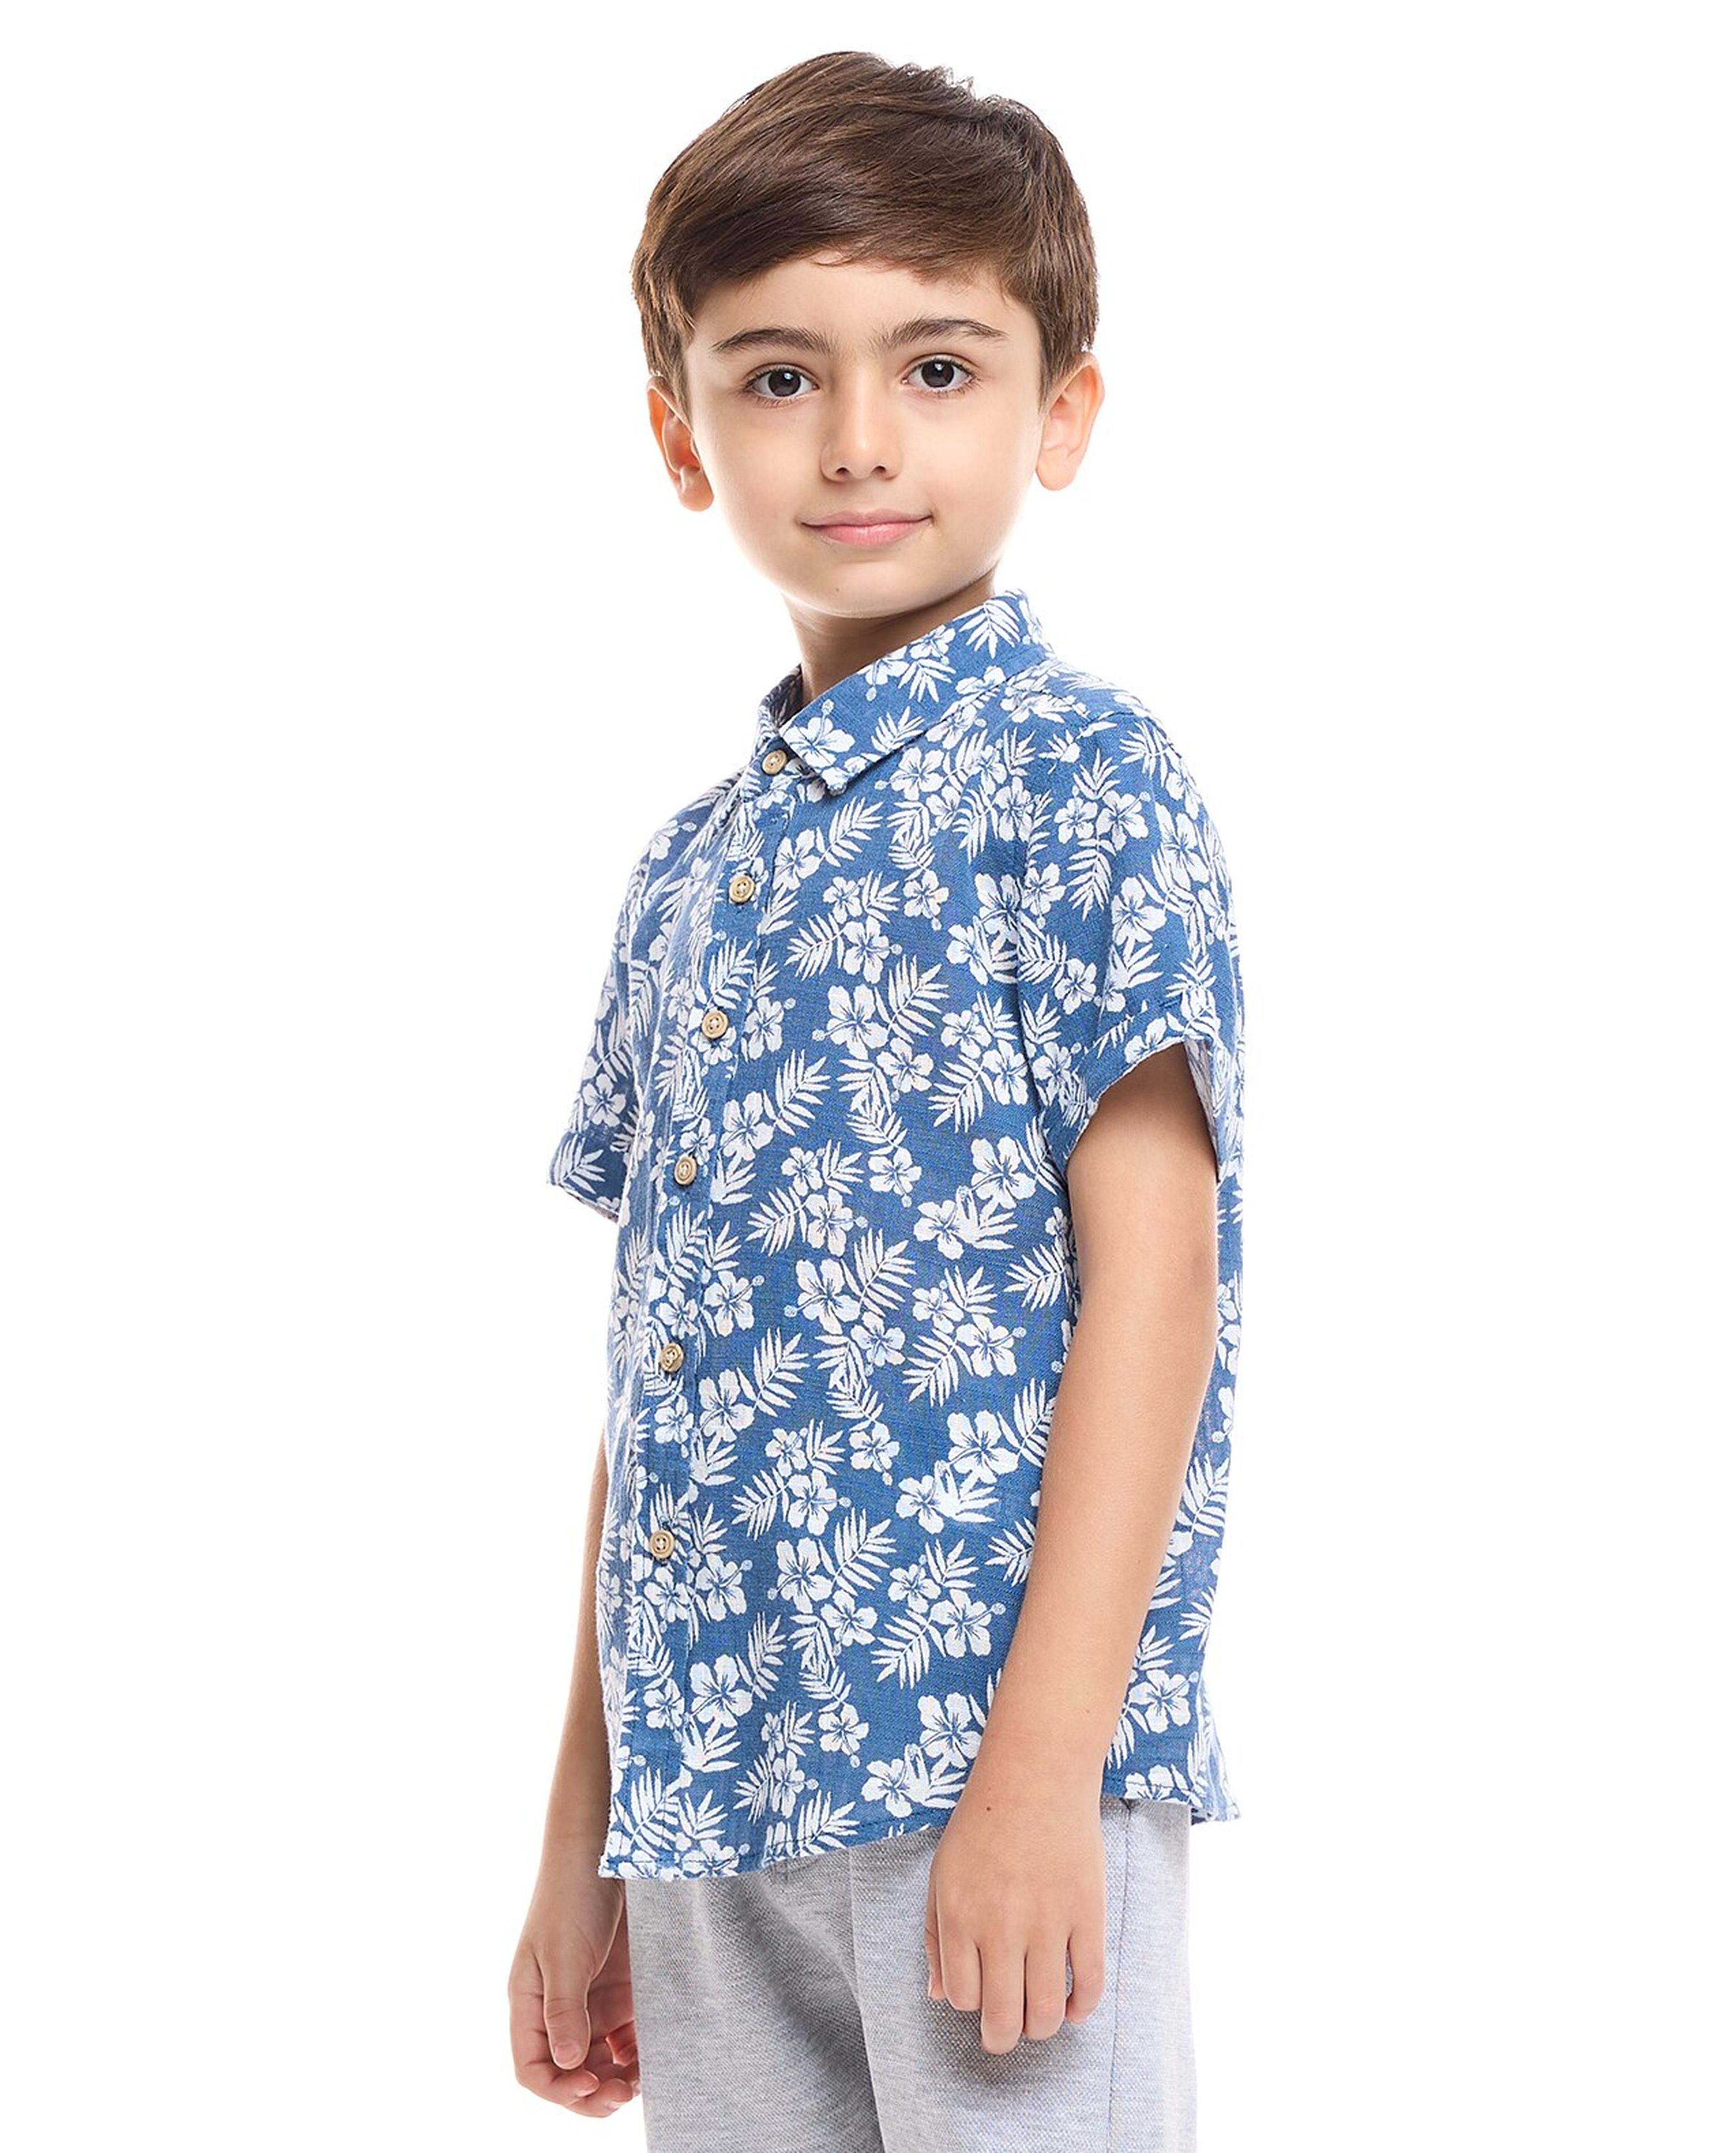 Floral Print Shirt with Spread Collar and Short Sleeves